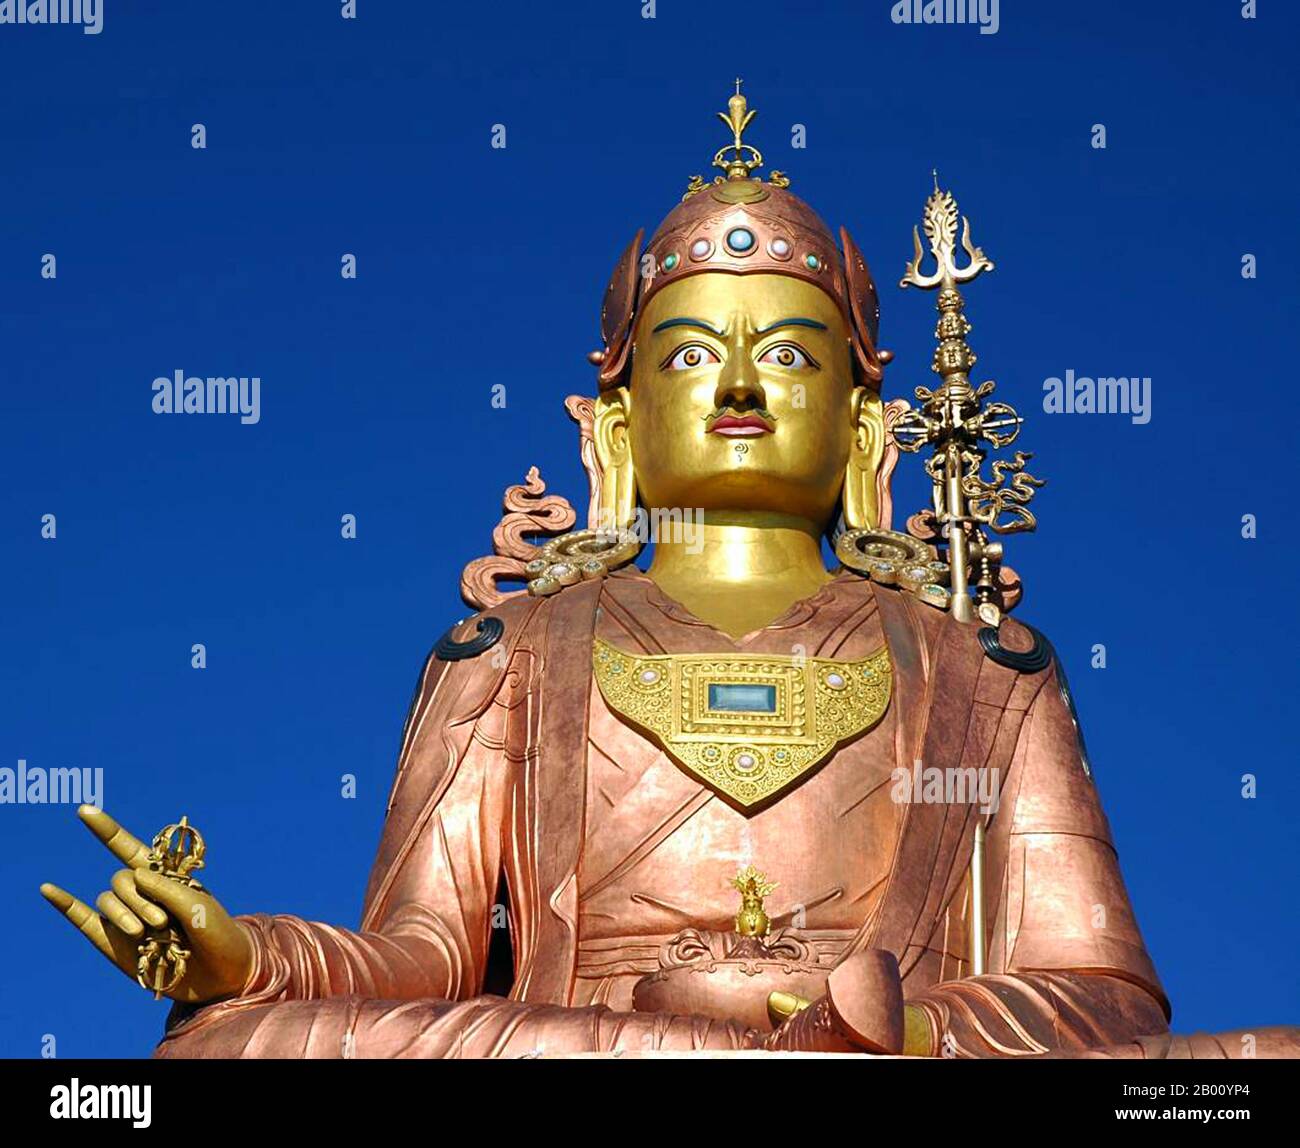 India: Image of Guru Rinpoche, Namchi, Sikkim. Photo by Carsten Nebel (CC BY-SA 3.0 License).  Statue of Guru Rinpoche, the patron saint of Sikkim. The statue in Namchi is the second tallest statue of the Buddhist saint in the world at 36 metres (120 ft). Stock Photo